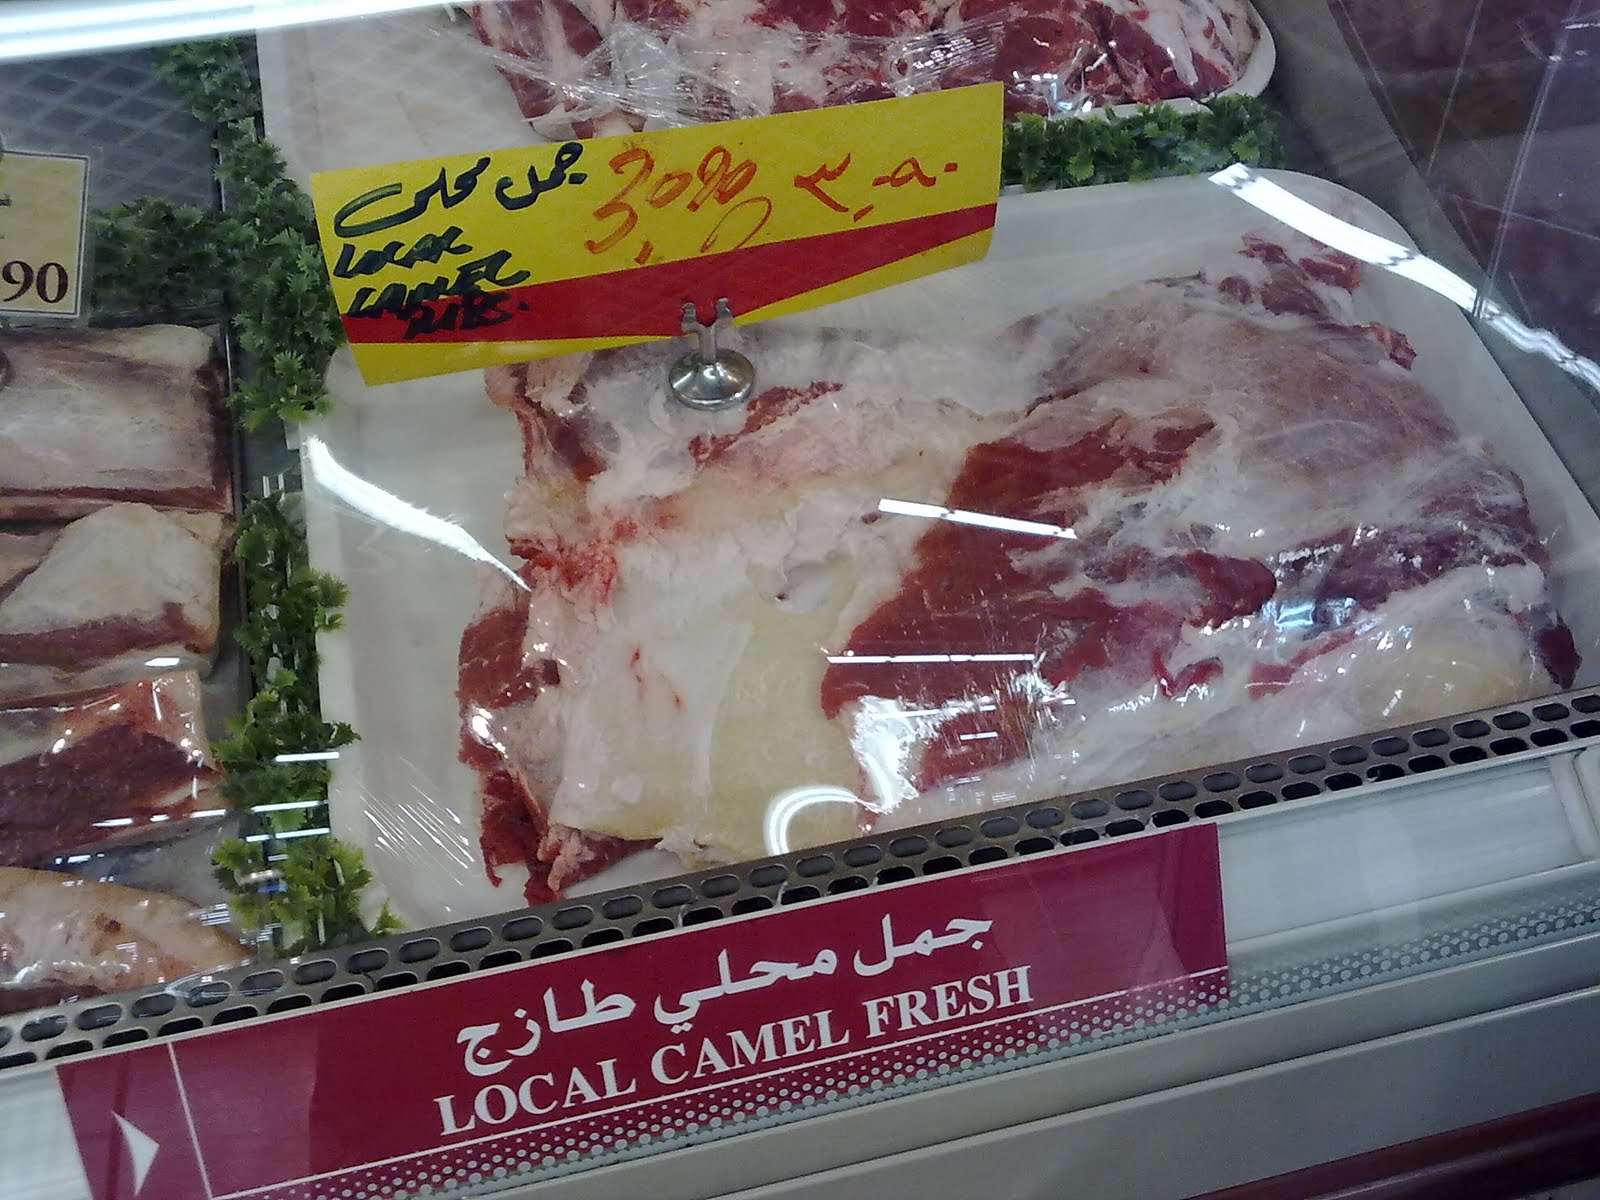 Kuweight 64: CAMEL MEAT